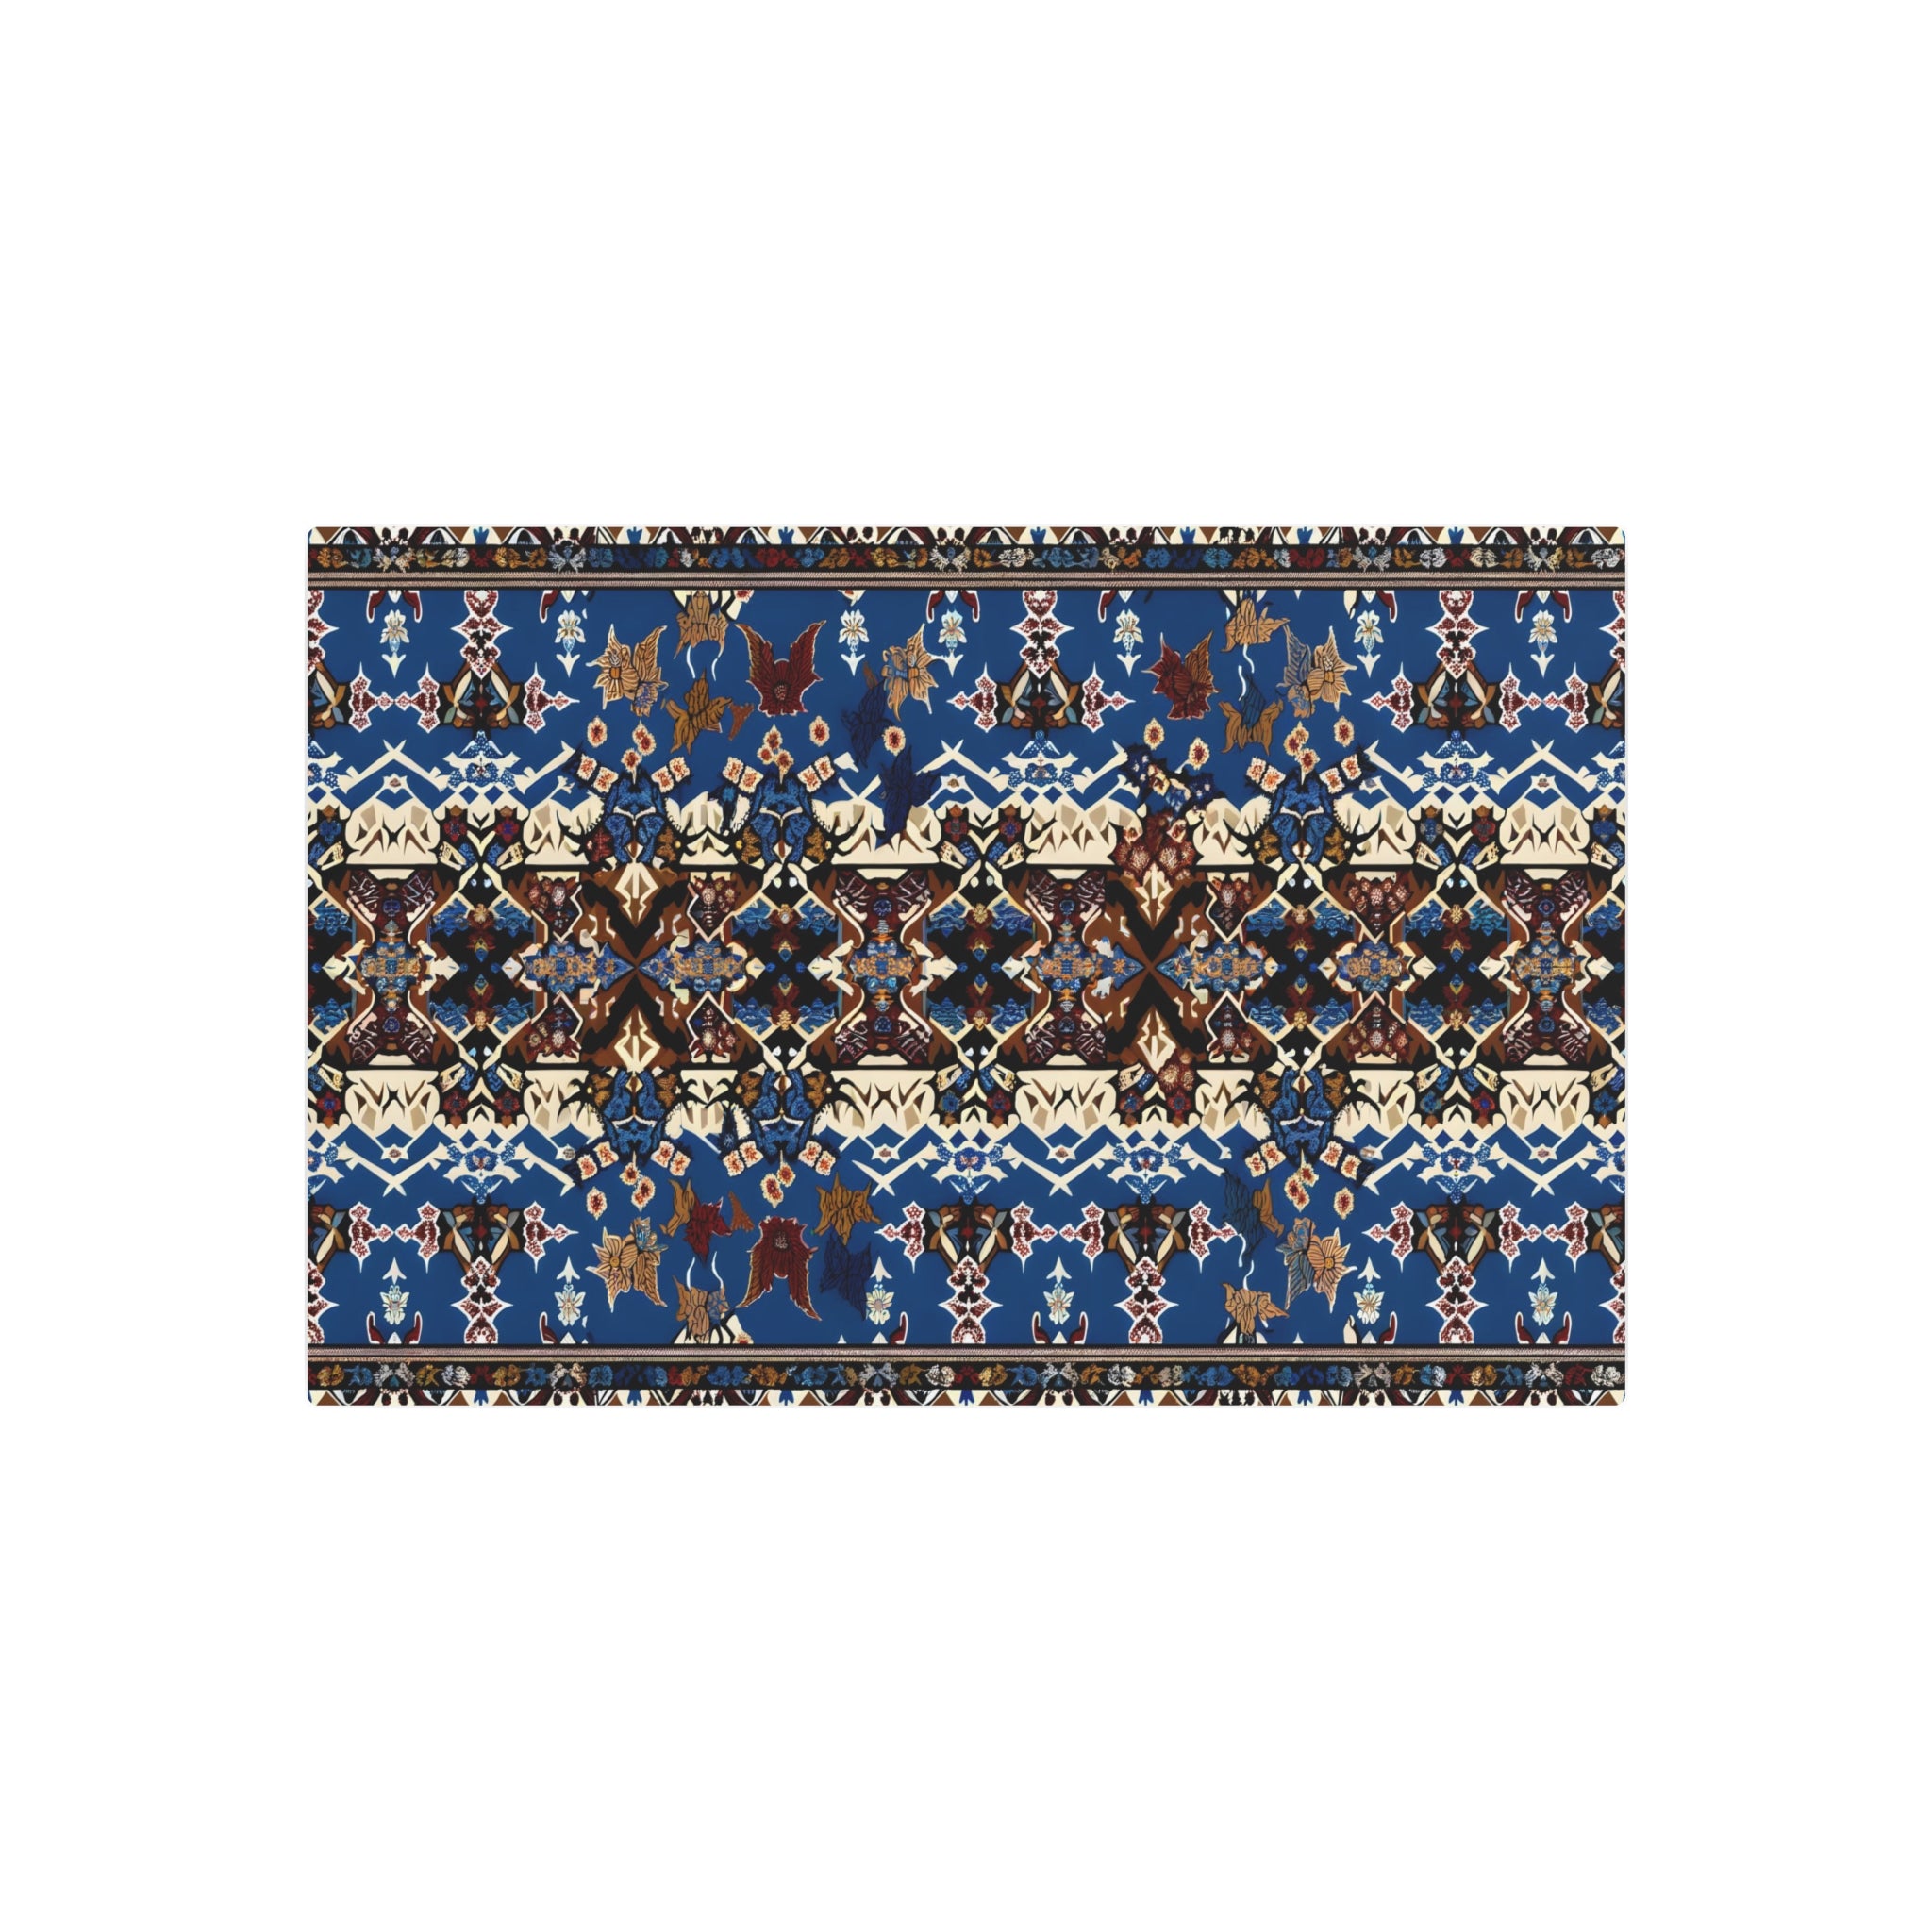 Metal Poster Art | "Traditional Indonesian Batik Art - Geometric & Floral Patterns in Deep Blue and Earthy Brown with Red & Yellow Accents - Non-Western Global - Metal Poster Art 30″ x 20″ (Horizontal) 0.12''